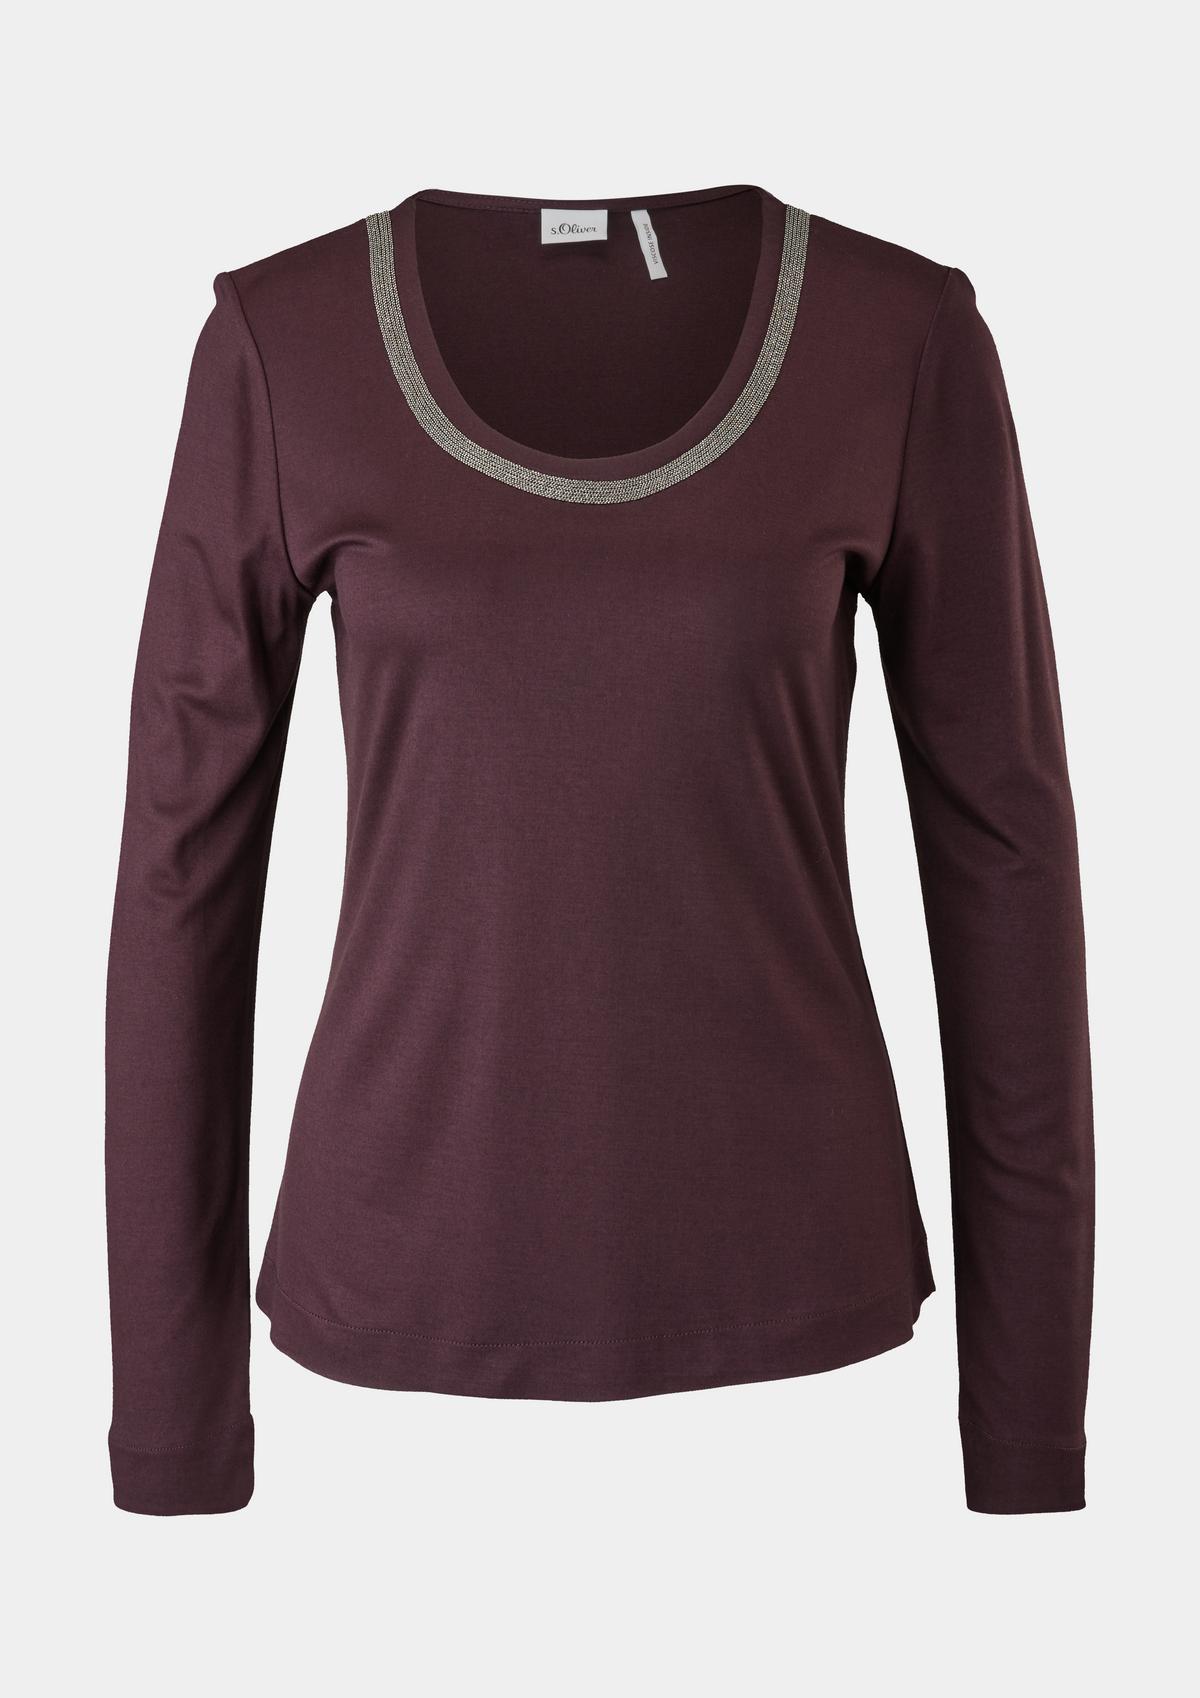 s.Oliver Long sleeve top with a decorative detail